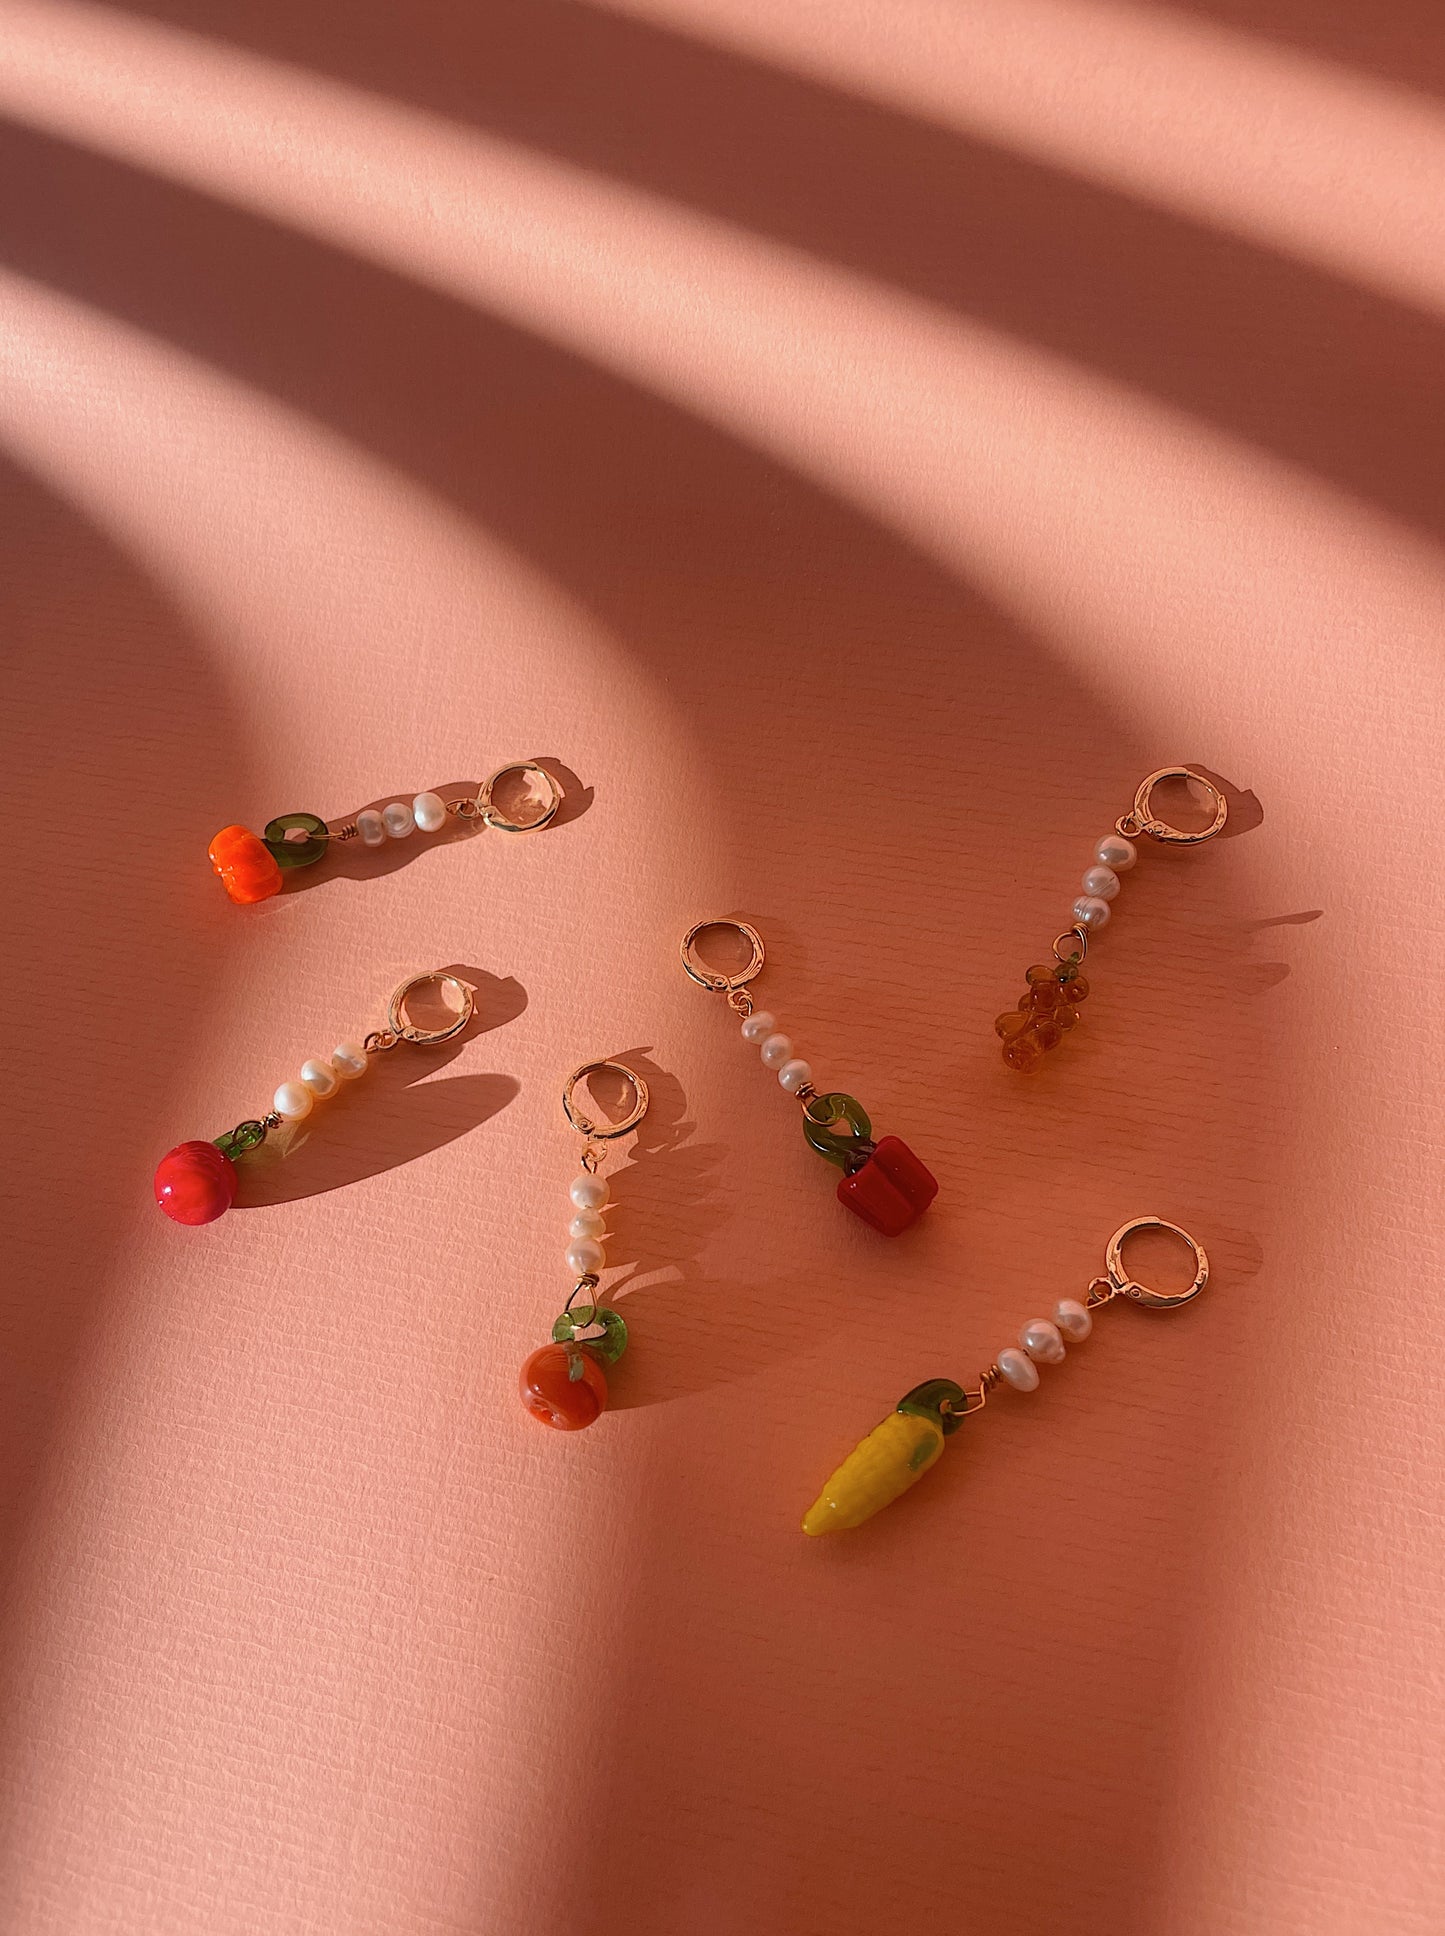 Fruity pearl earrings with 14k gold-plated hoops